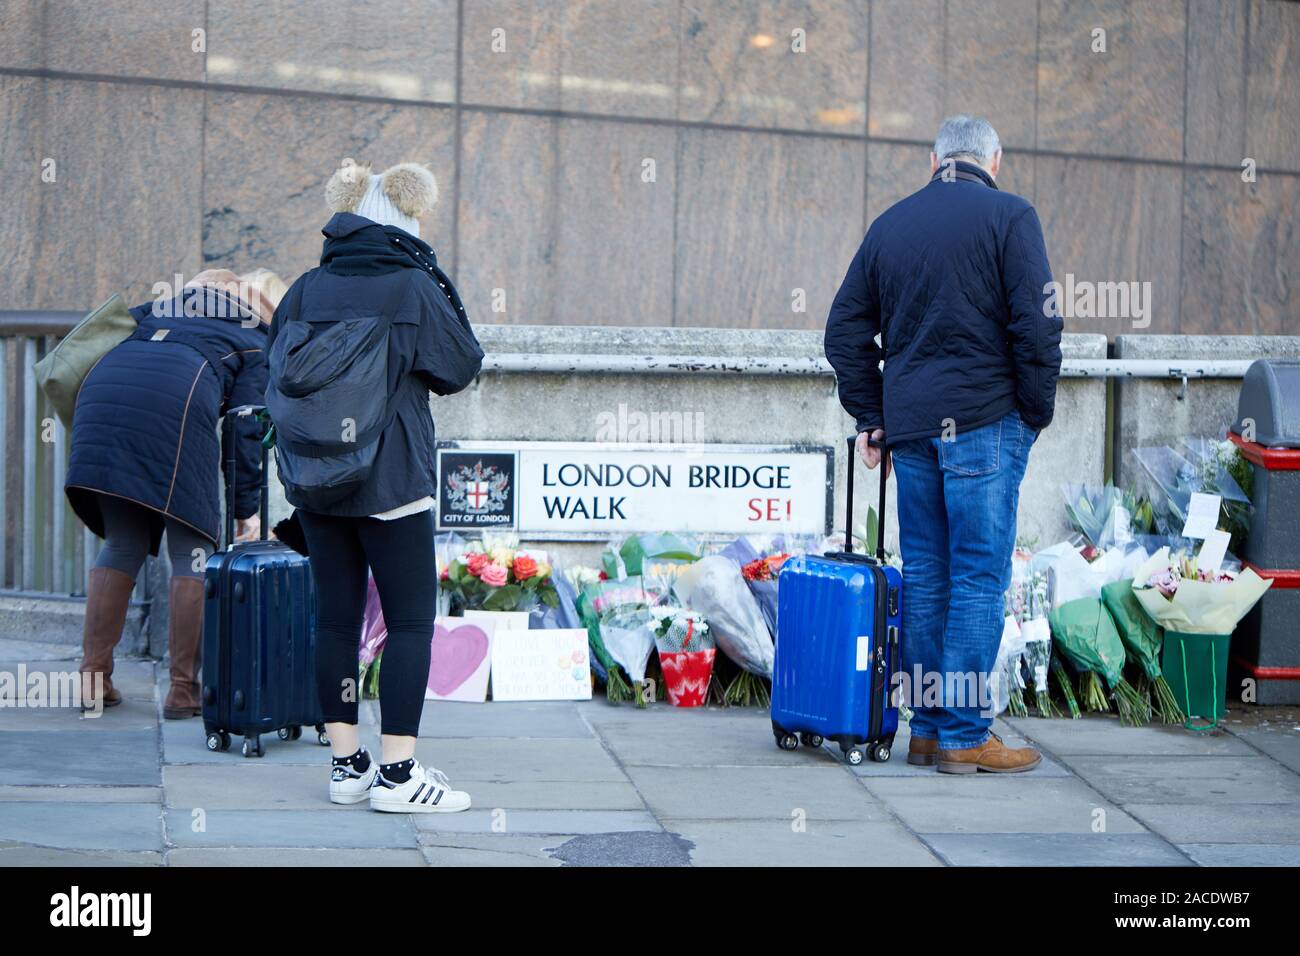 London, U.K. - Dec 2, 2019: Passers-by stop to read tributes left for the victims of the London Bridge terrorist attack, three days after the incident. Stock Photo